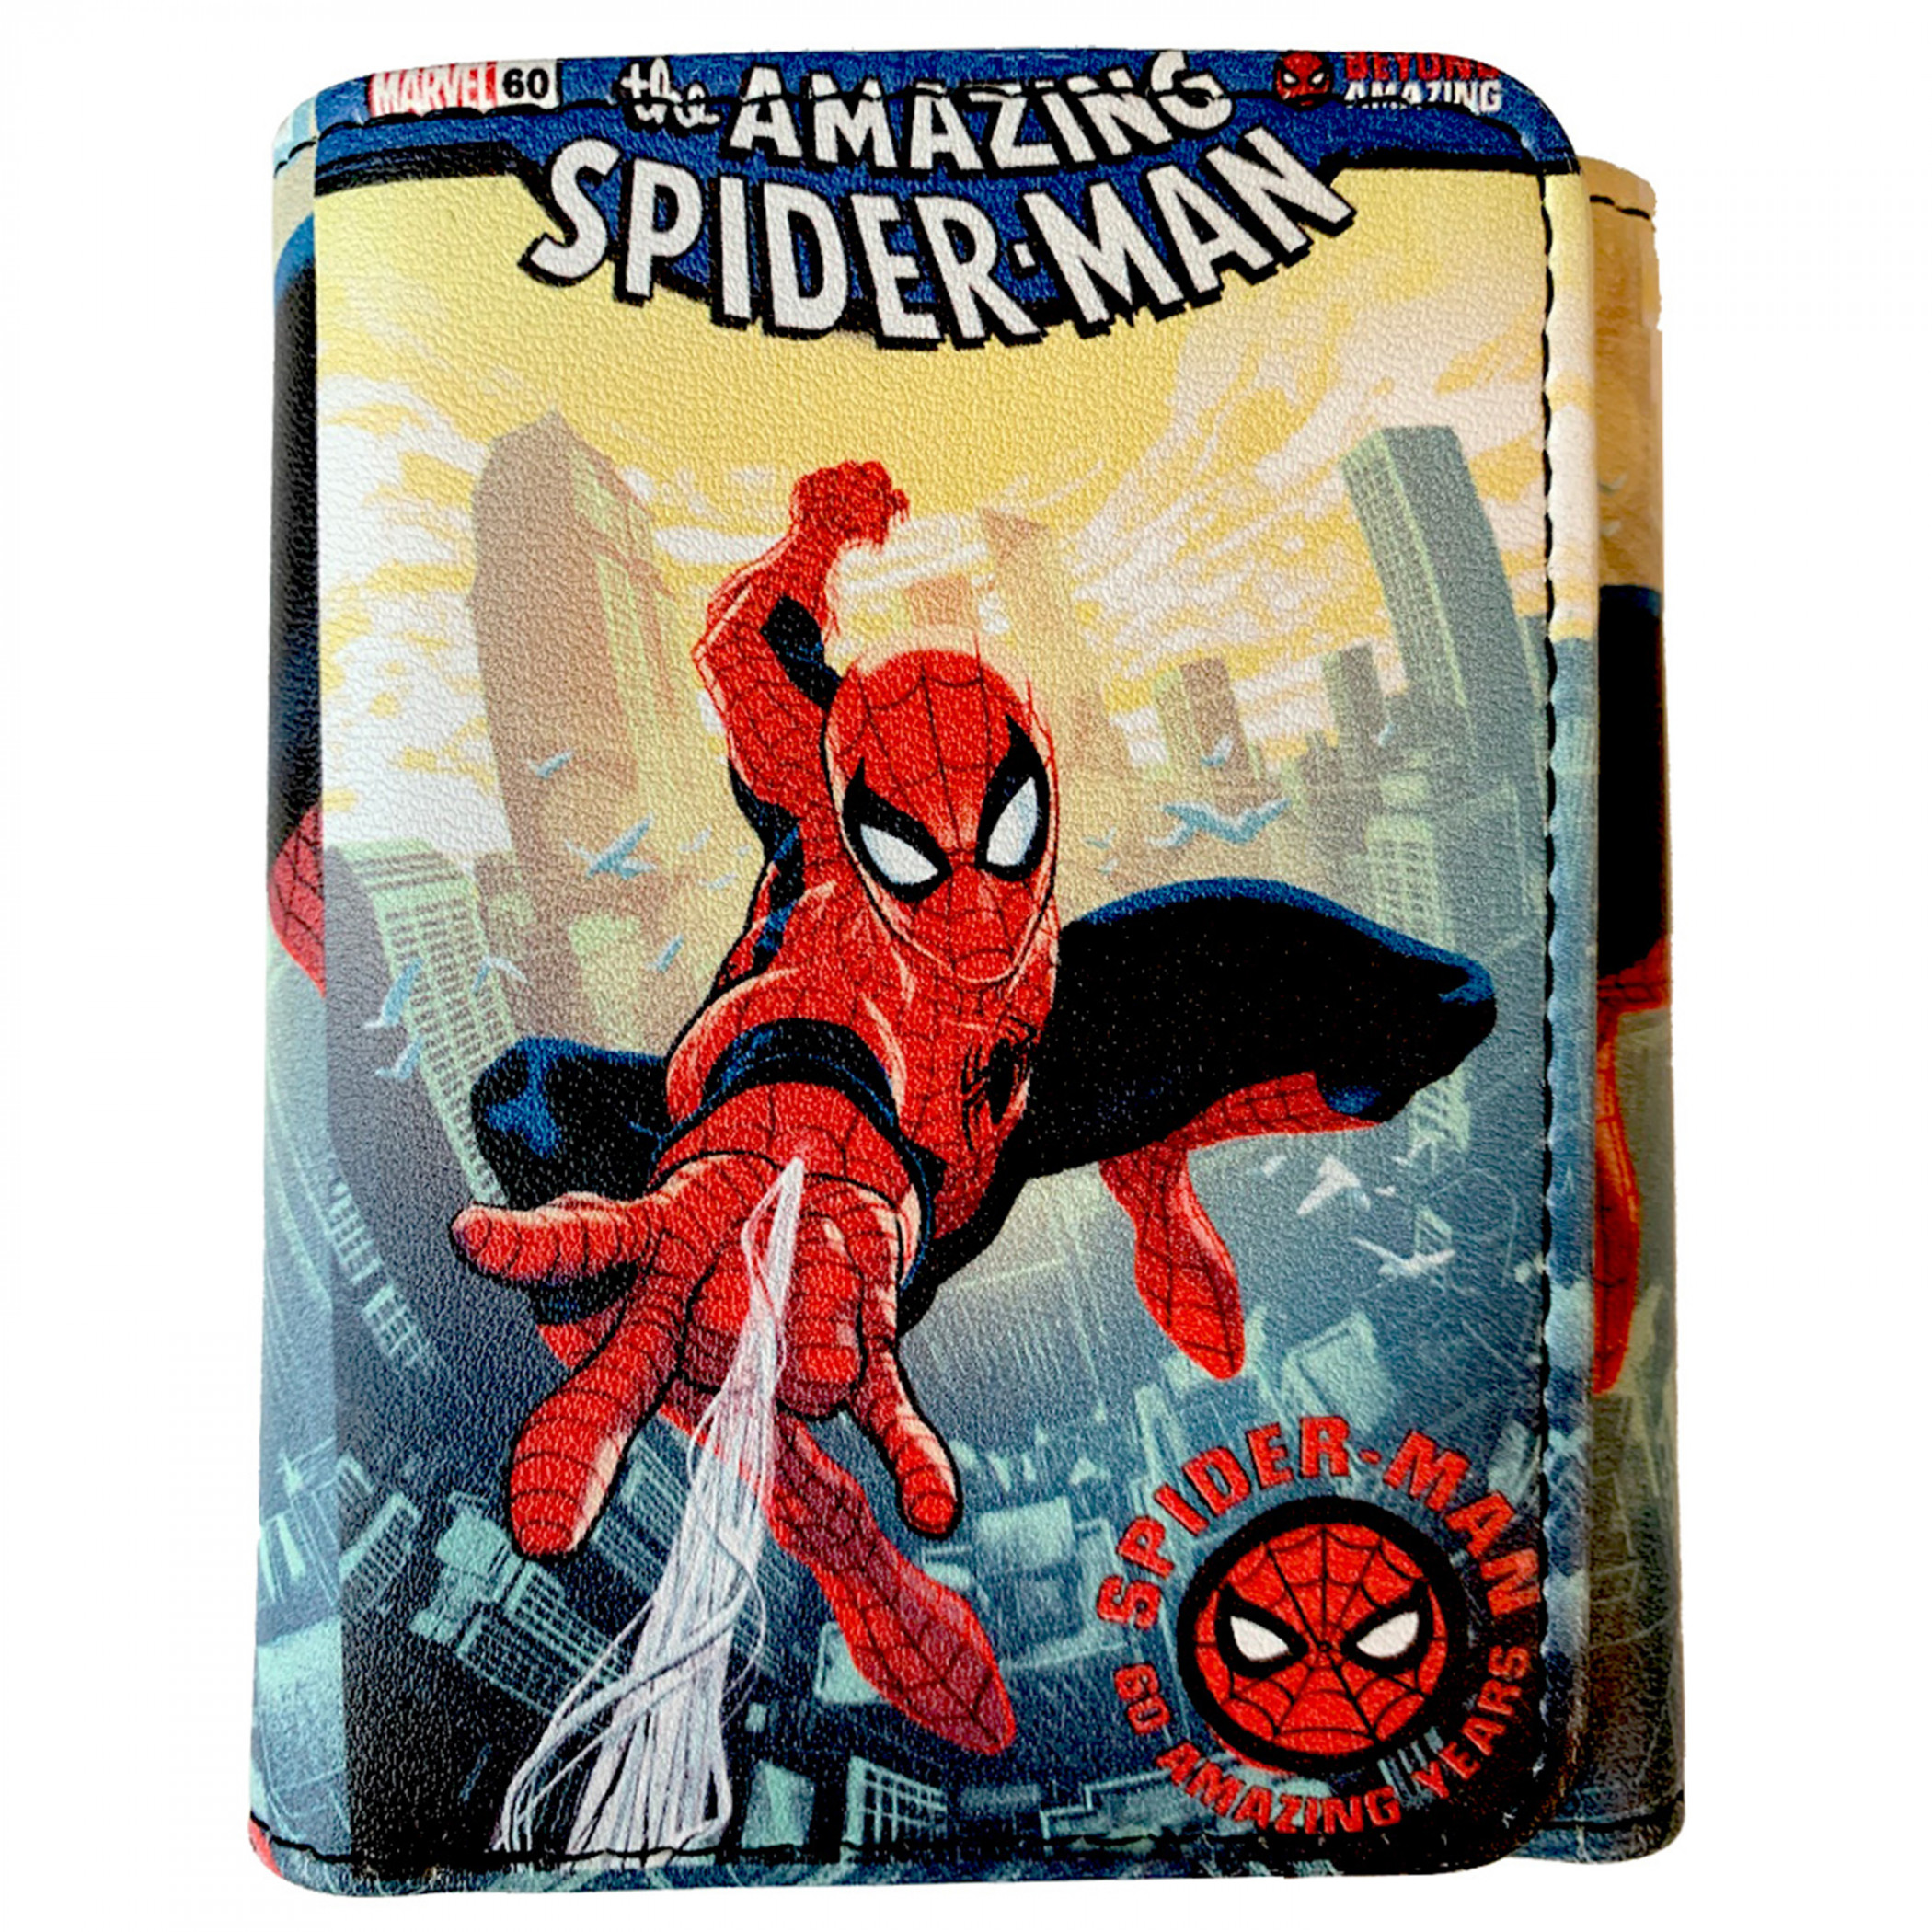 The Amazing Spider-Man City Skyline Trifold Wallet